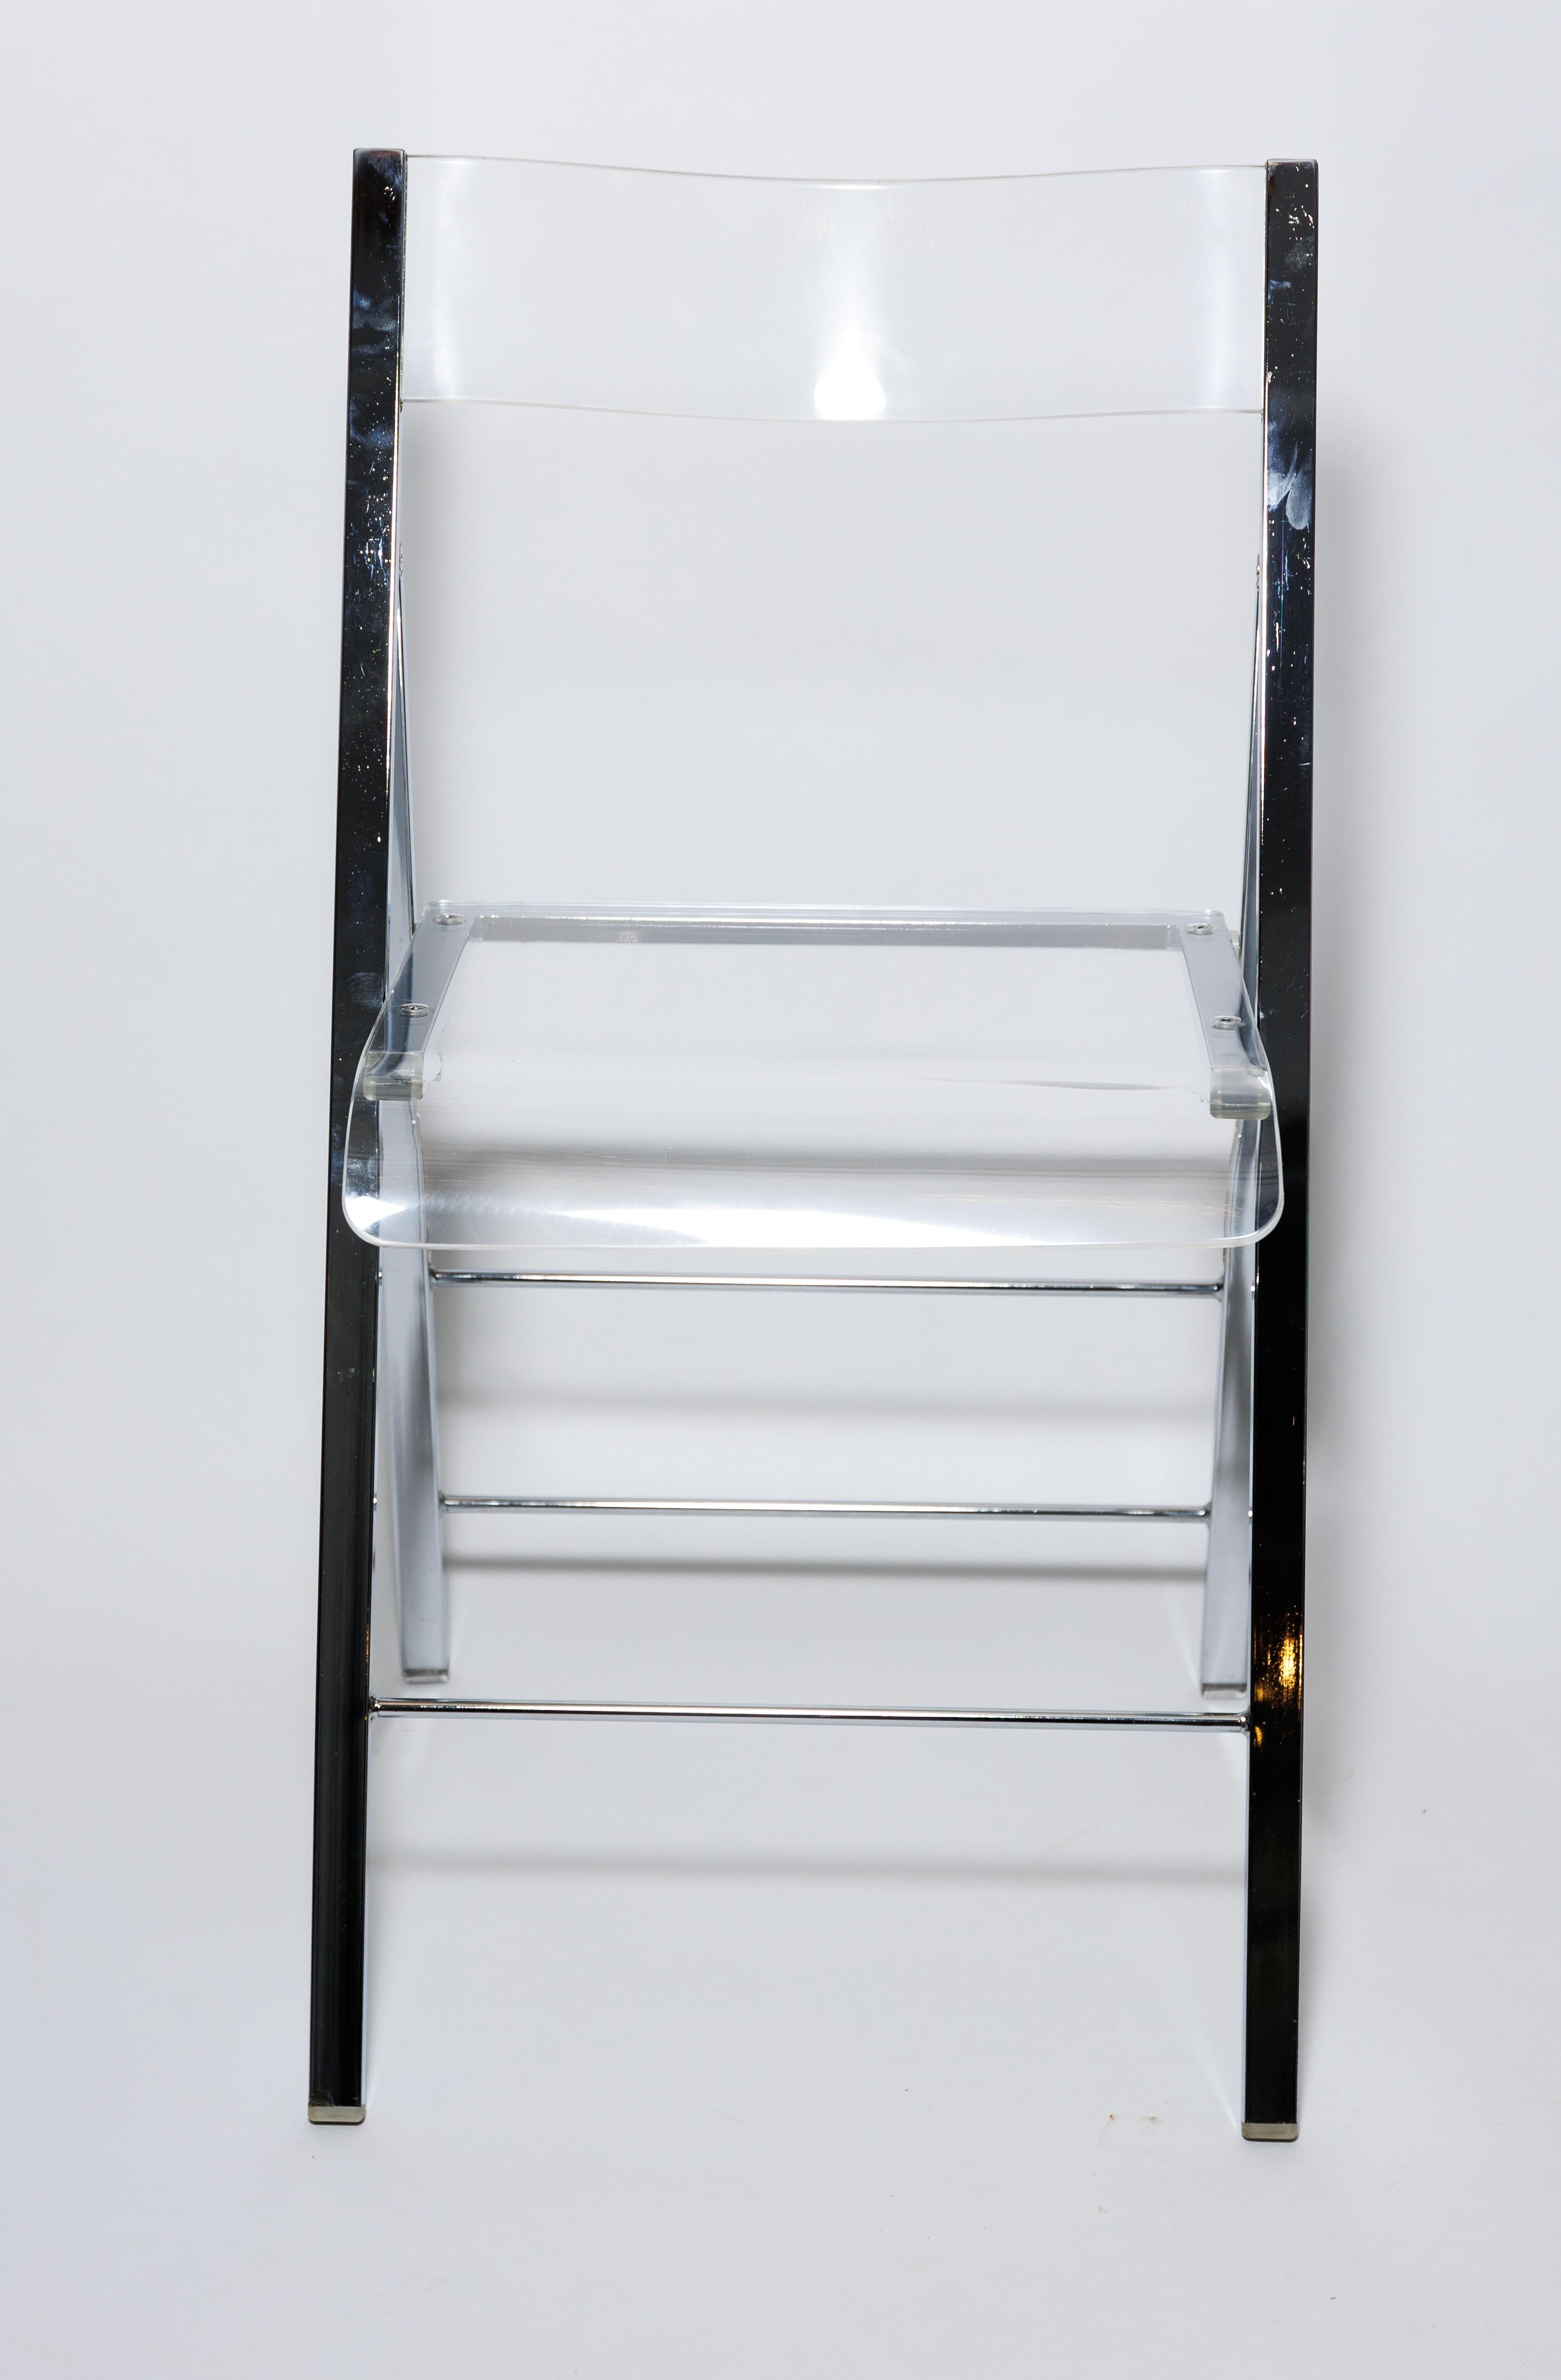 A Lucite and chrome folding chair, whenever you need extra sturdy seating.
Four available.